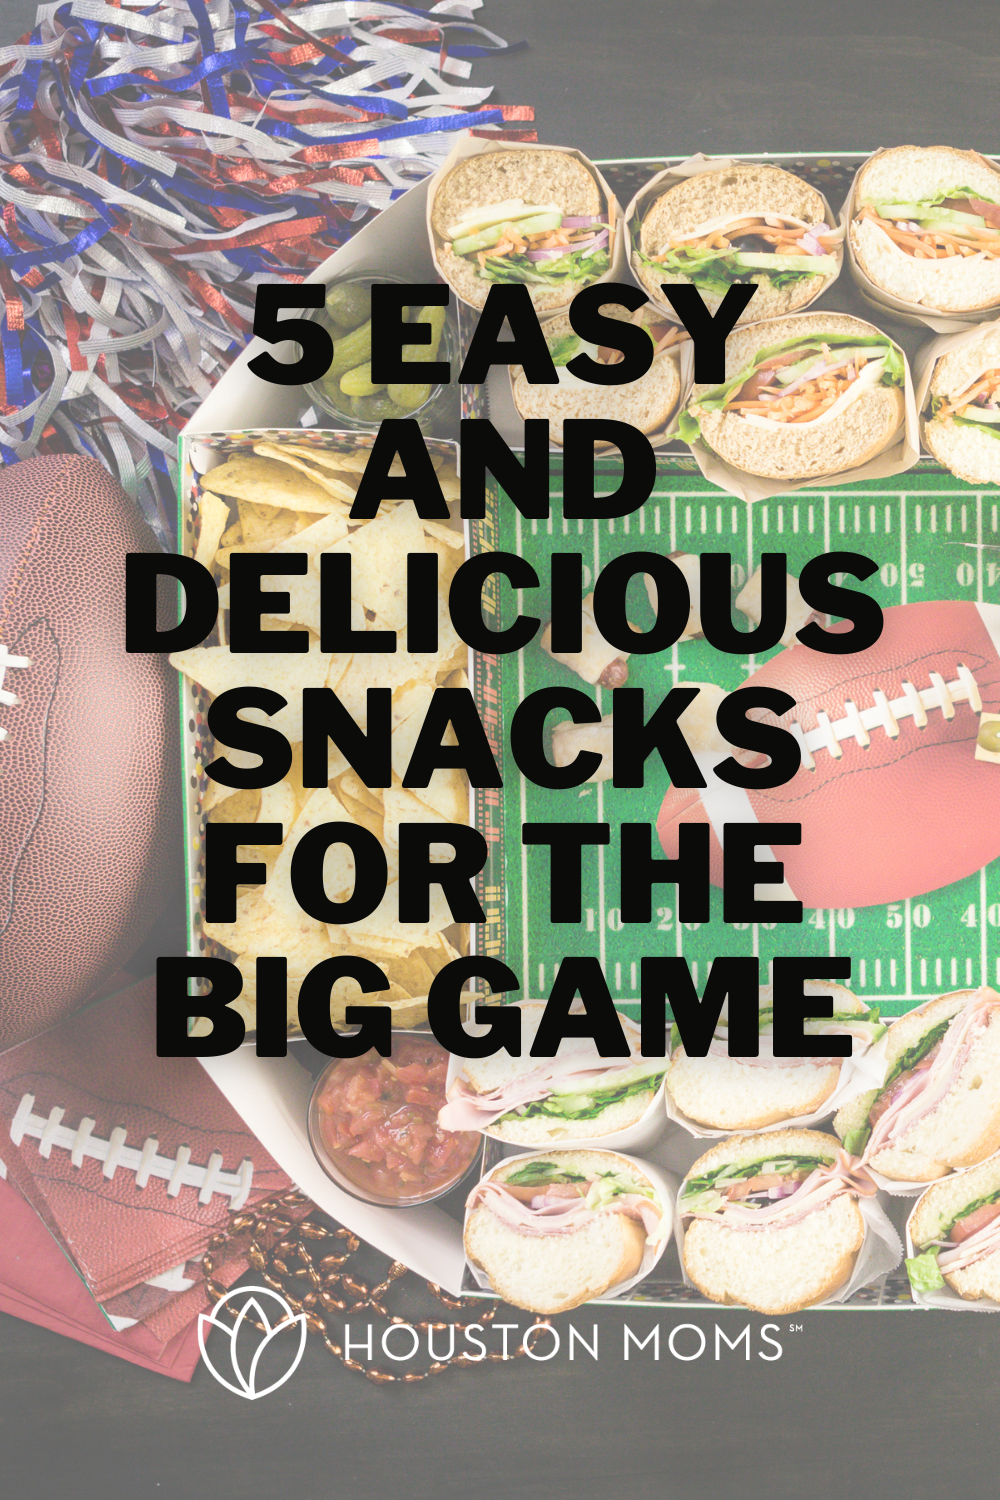 The Big Game – Are You Ready for Some Snacks?